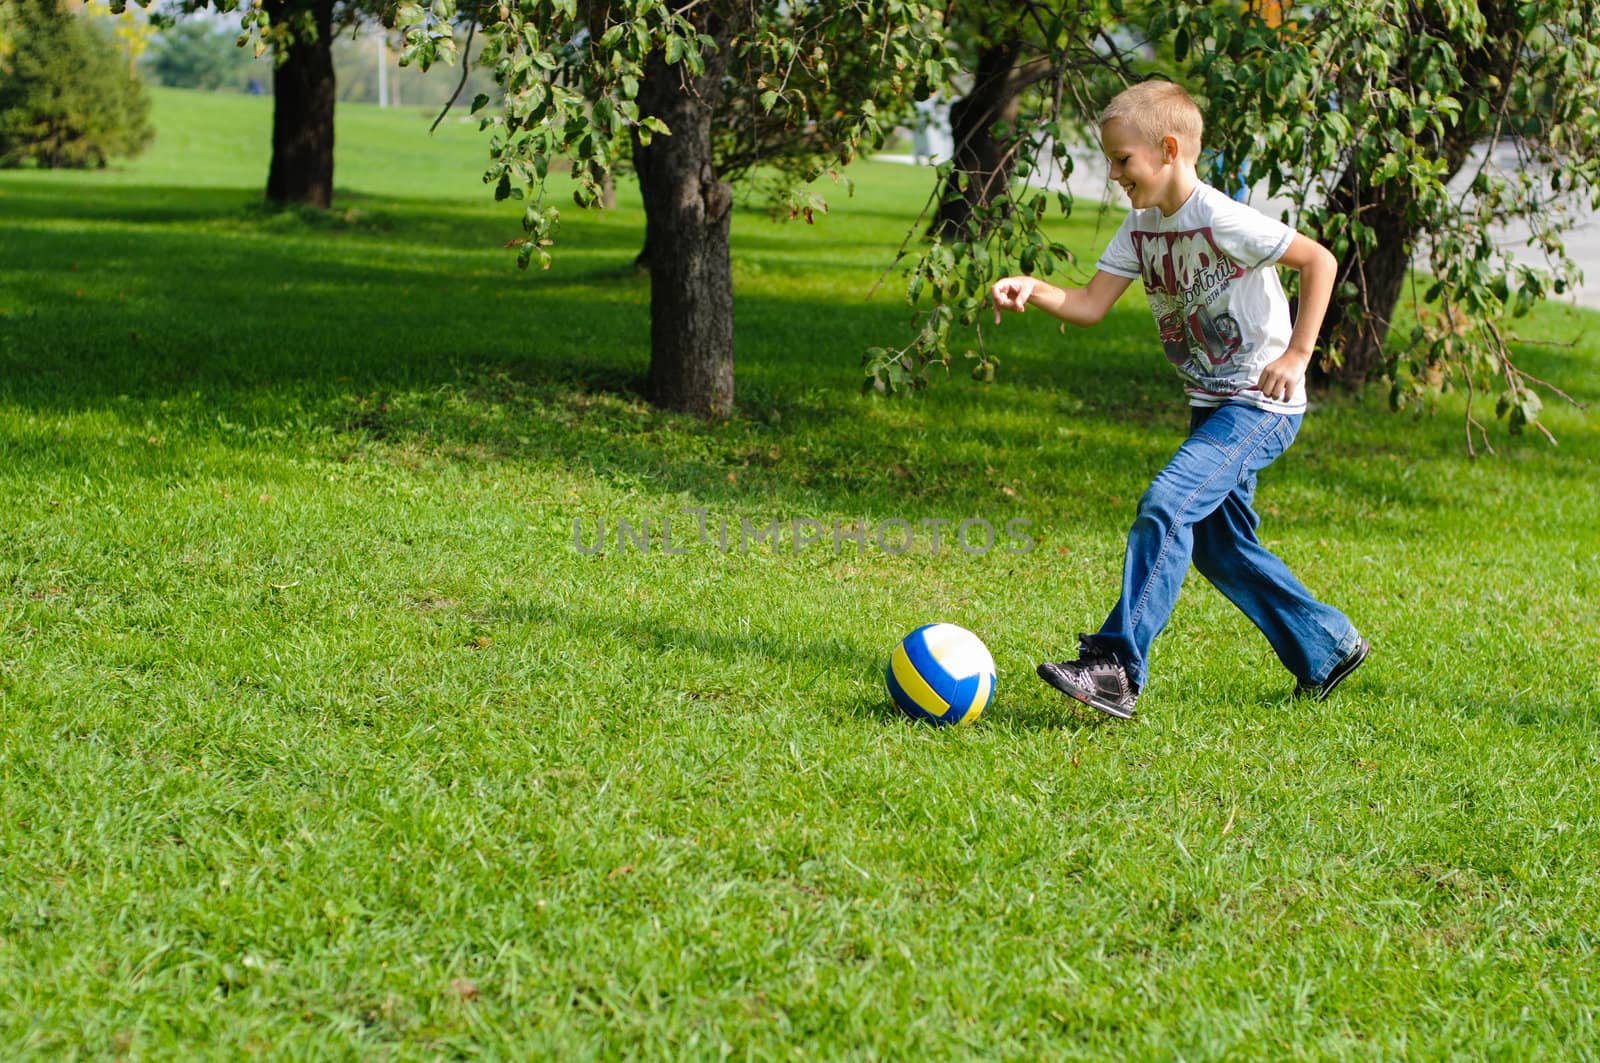 Young boy playing football outdoors by nvelichko